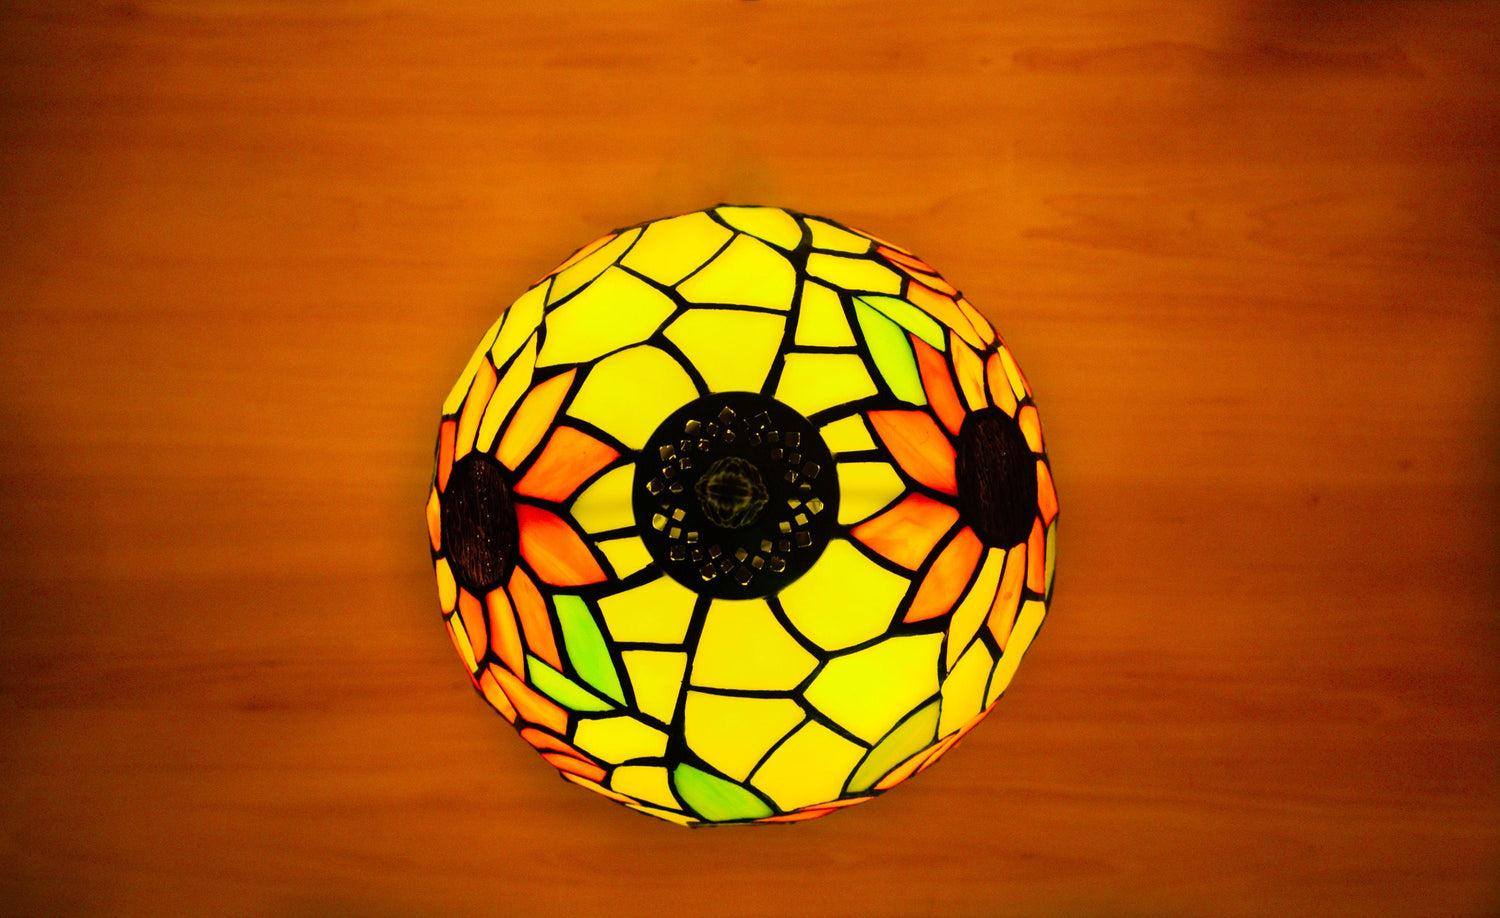 Sunflower Tiffany Lamp, Leadglass Stained Glass Shade, Crystal Bead Lamp Shade, Antique Lampshade, Stained Glass Lamp Shade, Bedside Lamp